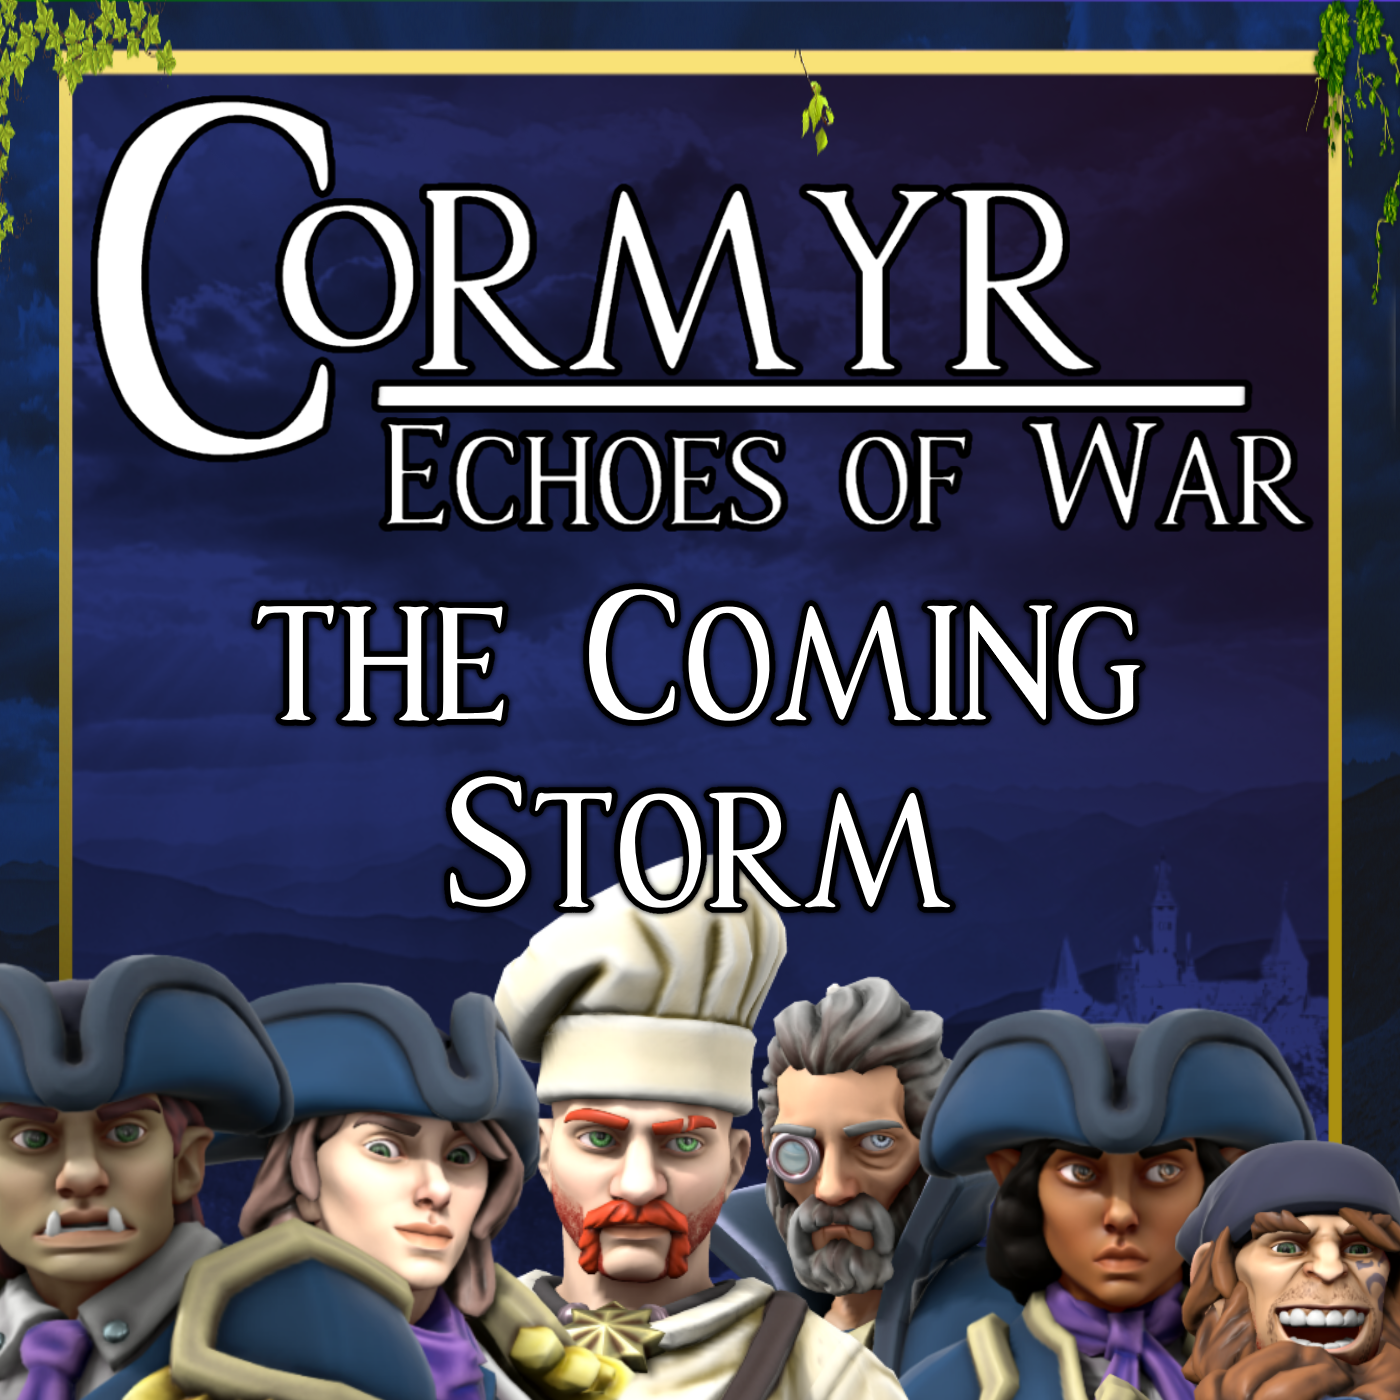 Cormyr: Echoes of War - The Coming Storm